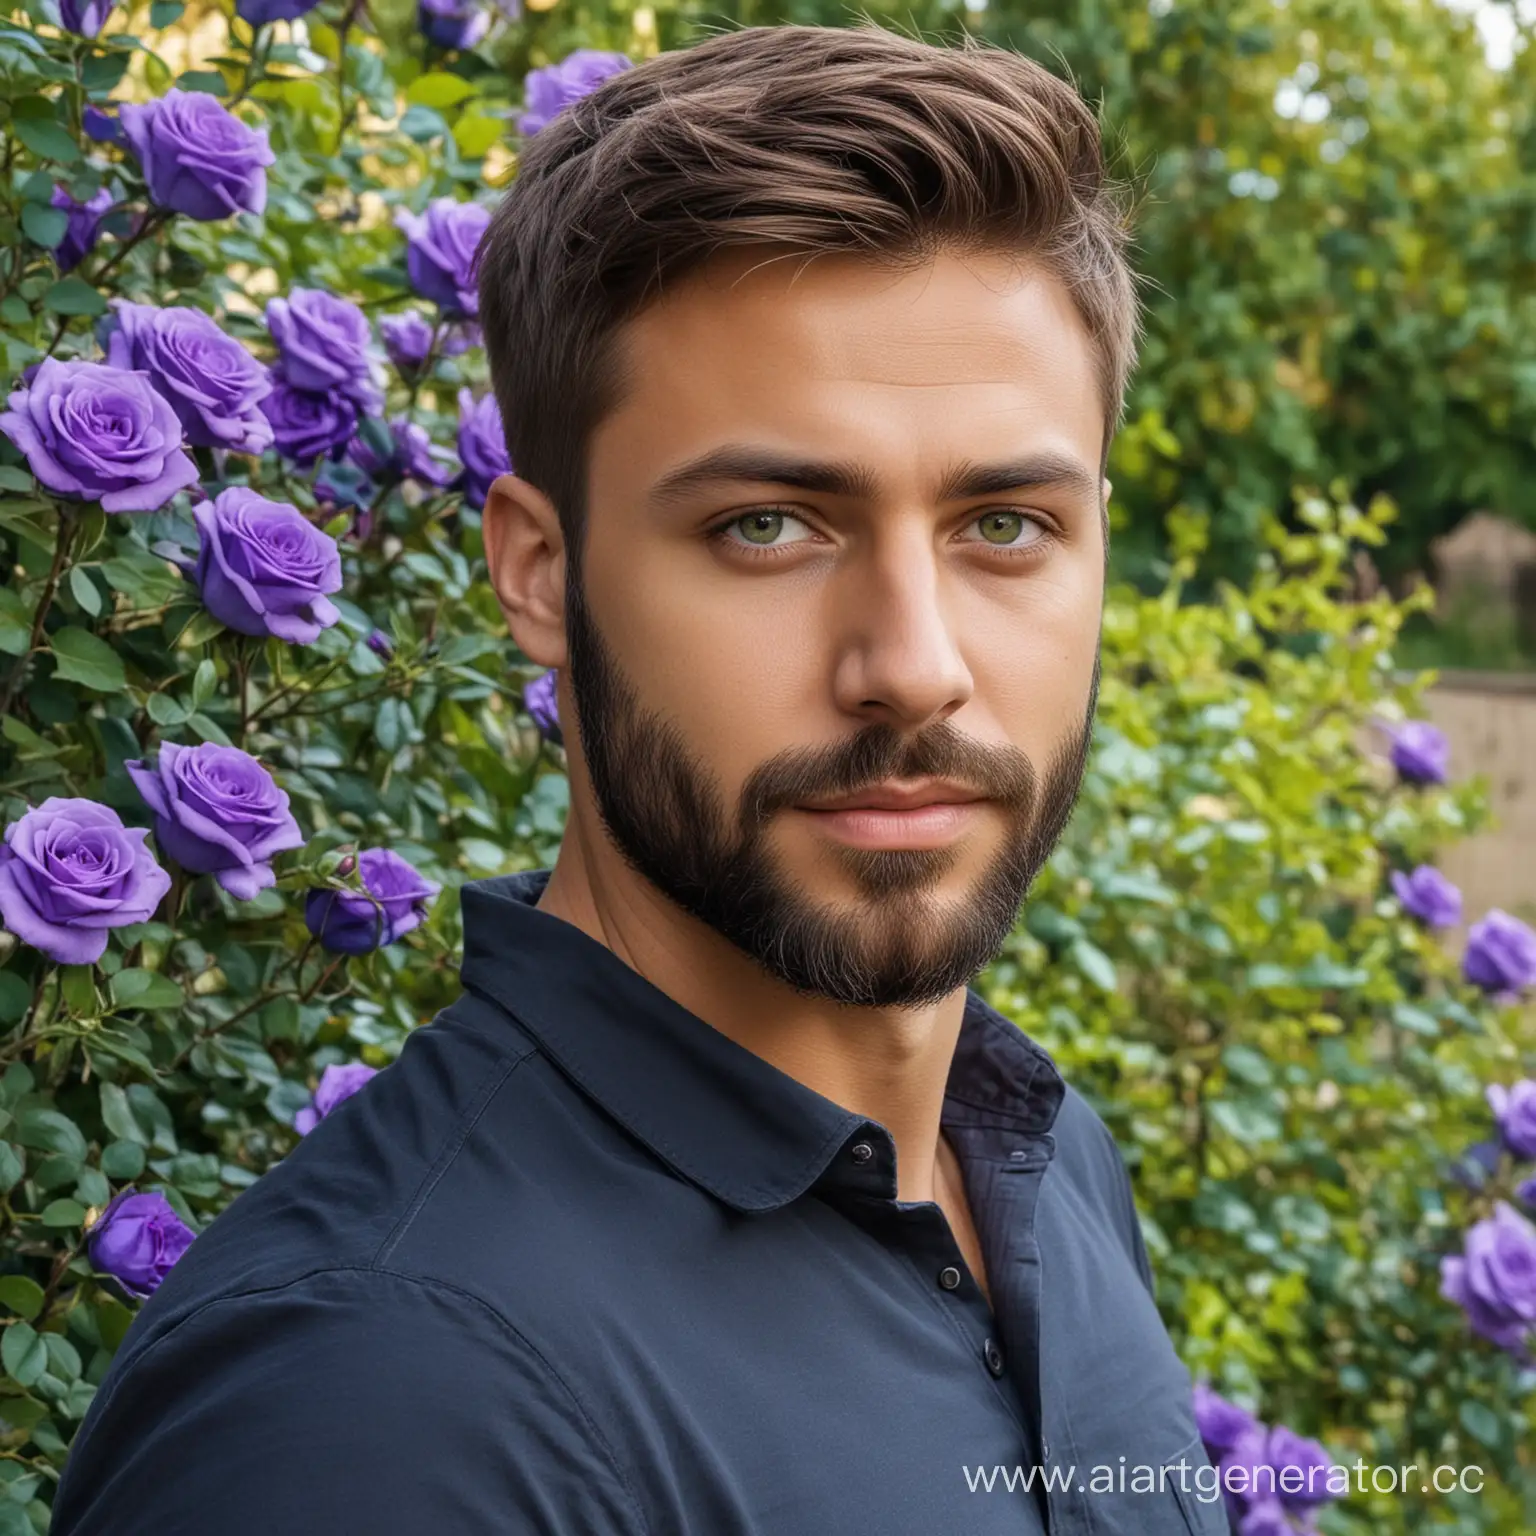 30YearOld-Man-with-Tanned-Skin-Enjoying-Garden-Amidst-Colorful-Rose-Bouquet